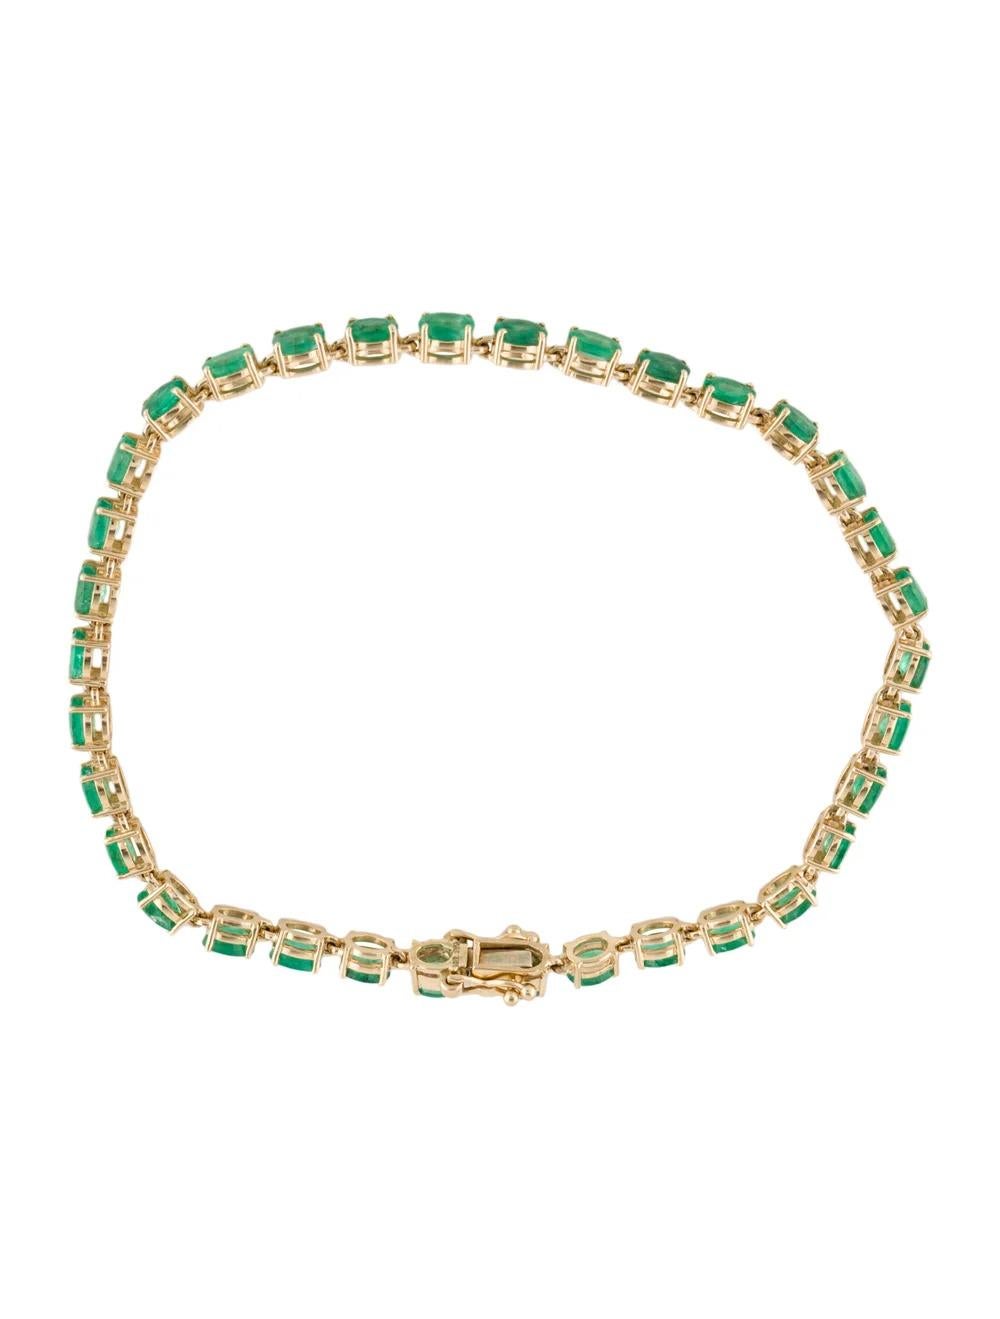 14K Gold 4.42ctw Emerald Link Bracelet - Fine Jewelry, Luxury Statement Piece In New Condition For Sale In Holtsville, NY